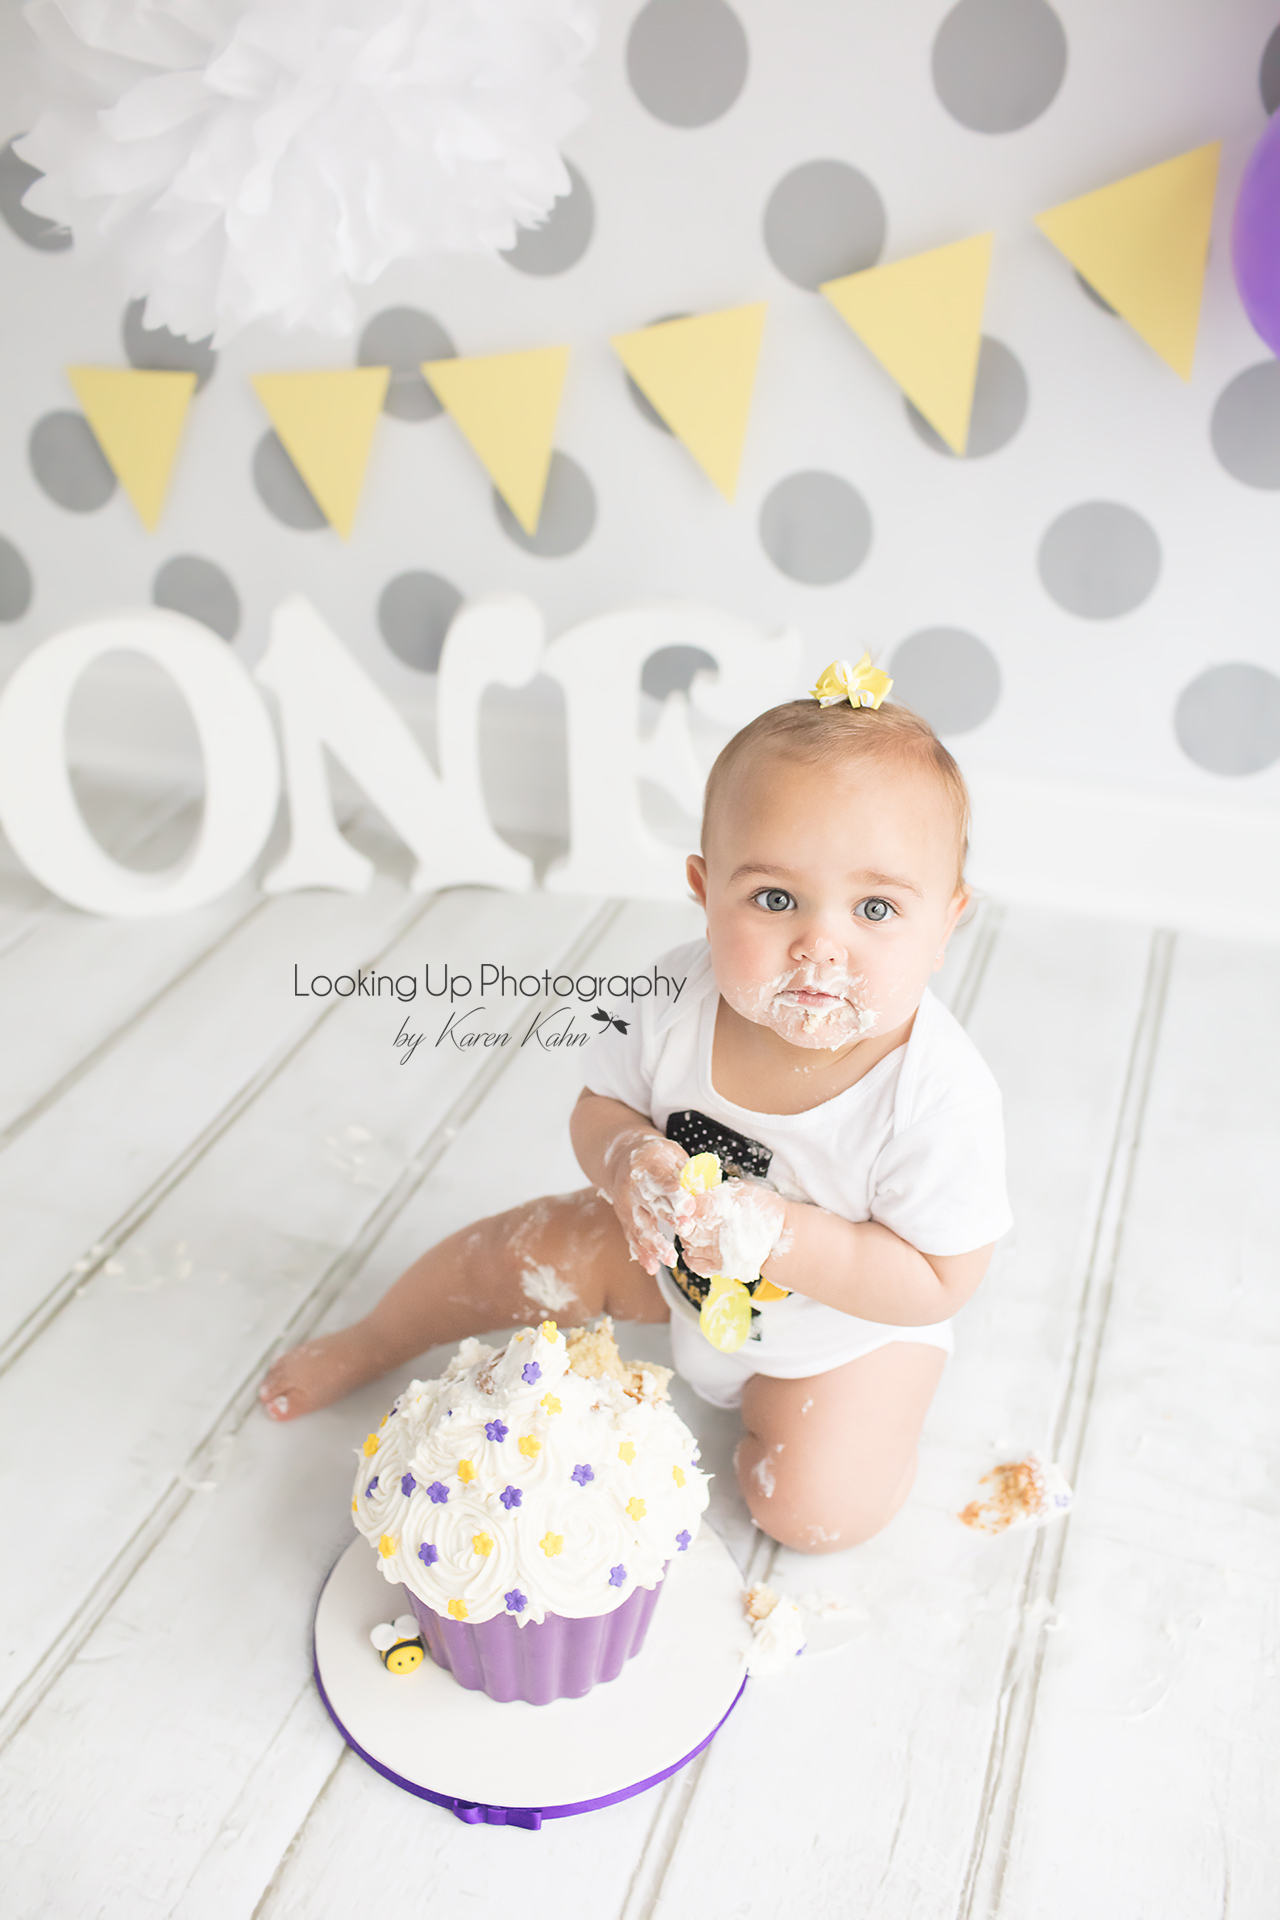 Cake smash session with bumble bee theme for one year old milestone baby girl looking adorable in yellow and white with gray polka dots for 12 month portrait